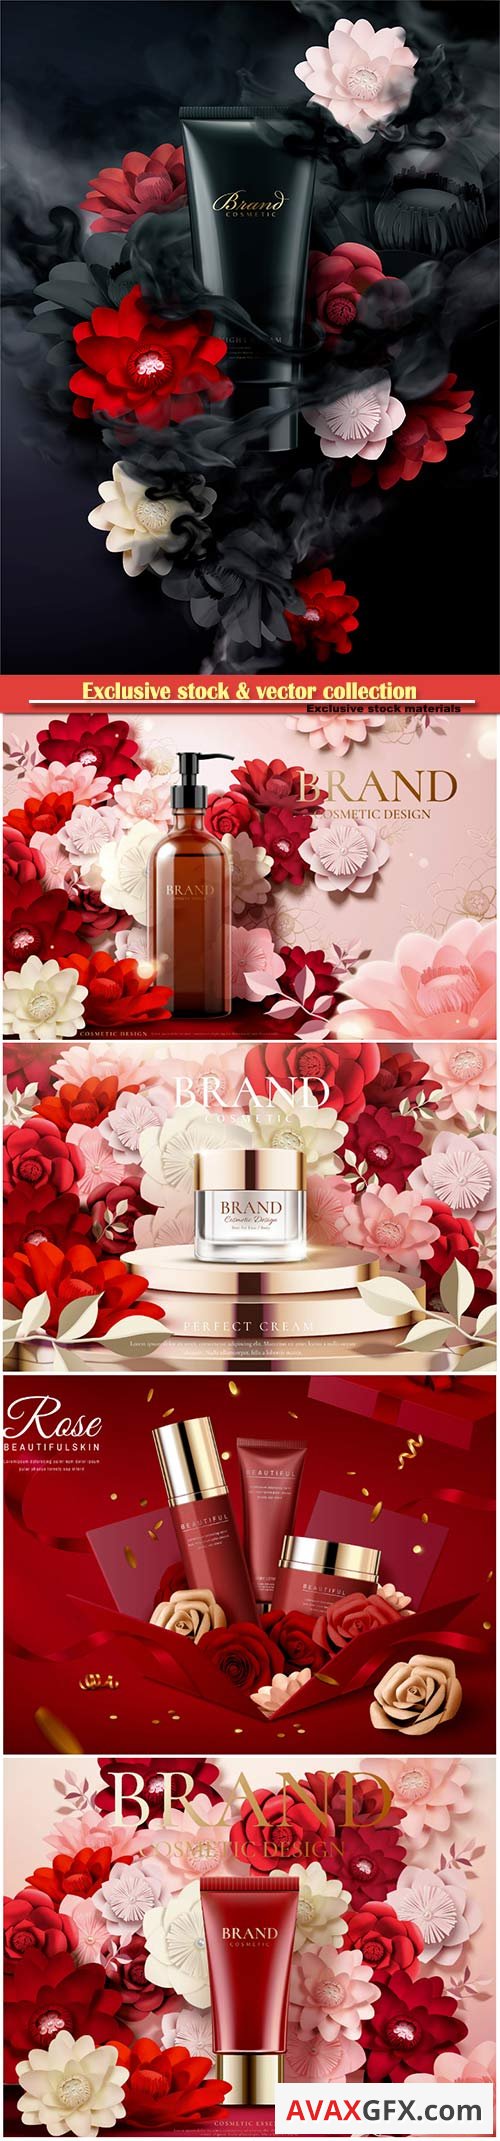 Cosmetic set ads with paper flowers in 3d illustration